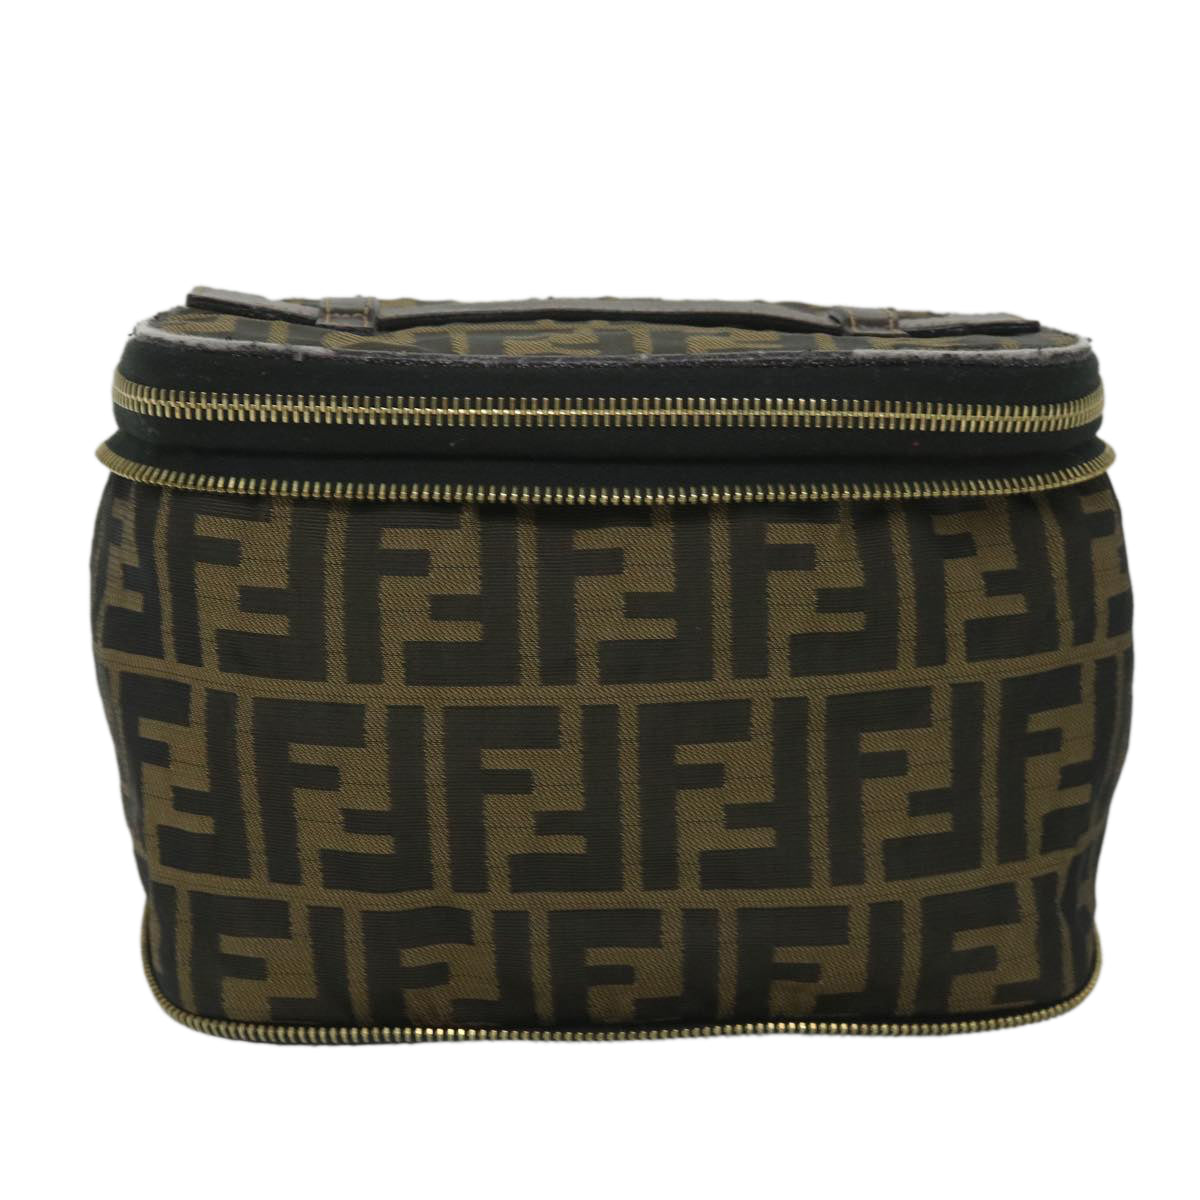 FENDI Zucca Canvas Vanity Cosmetic Pouch Black Brown Auth yb401